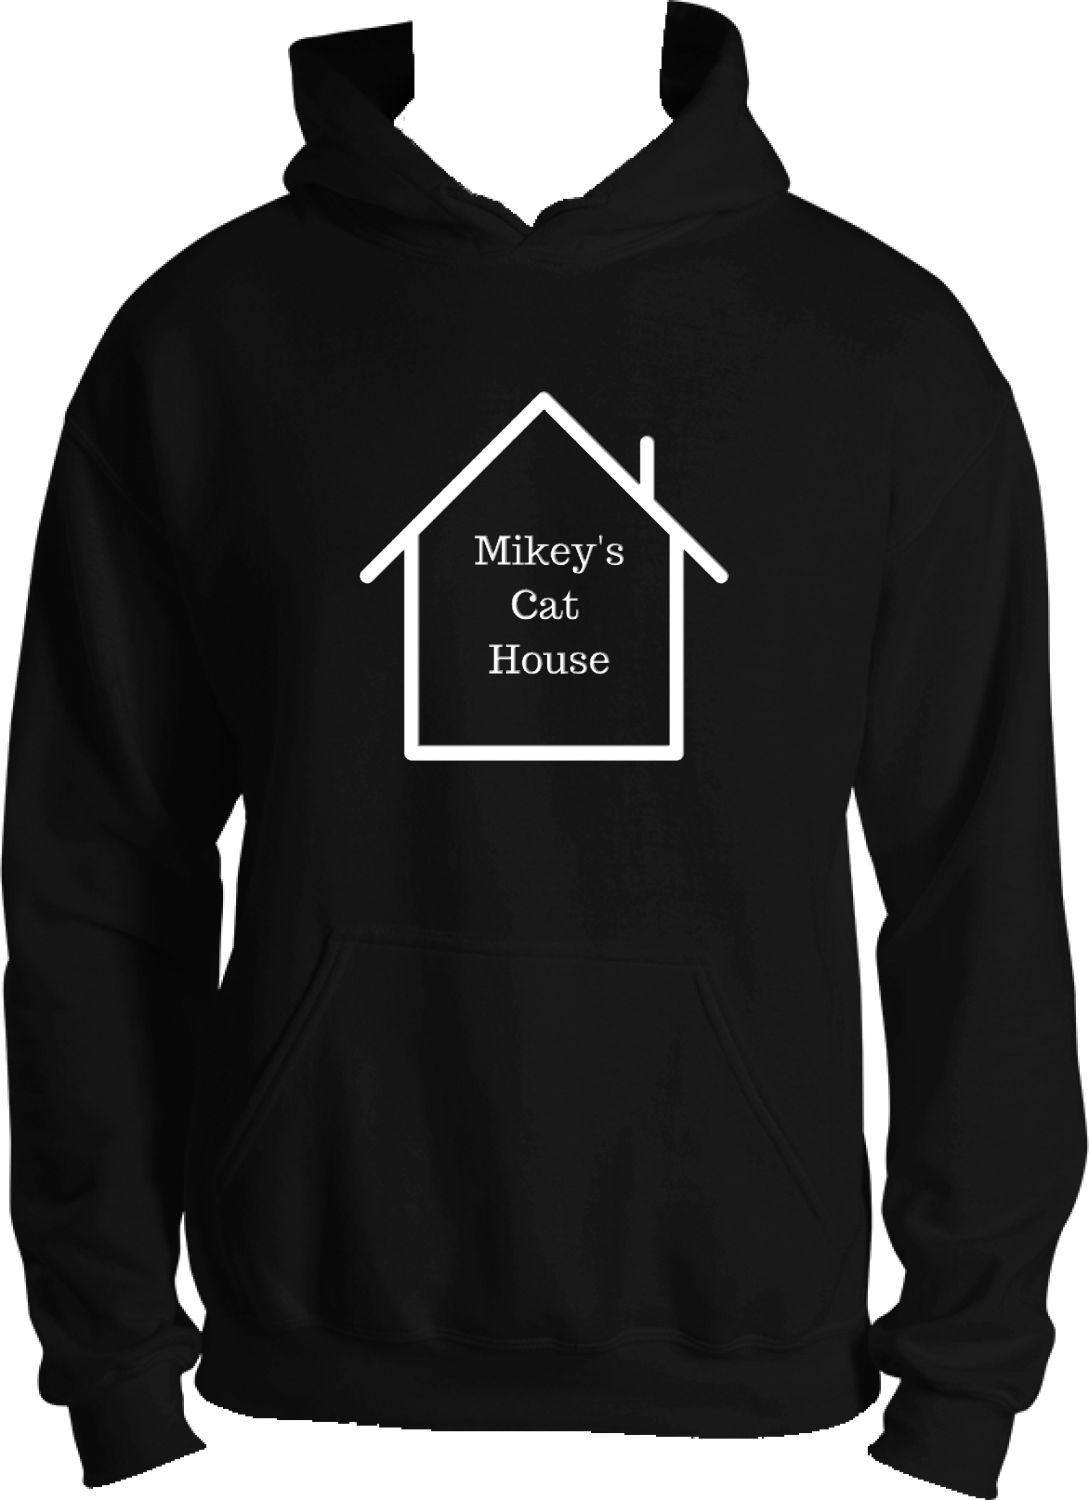 Mikey's Cat House Hoodie